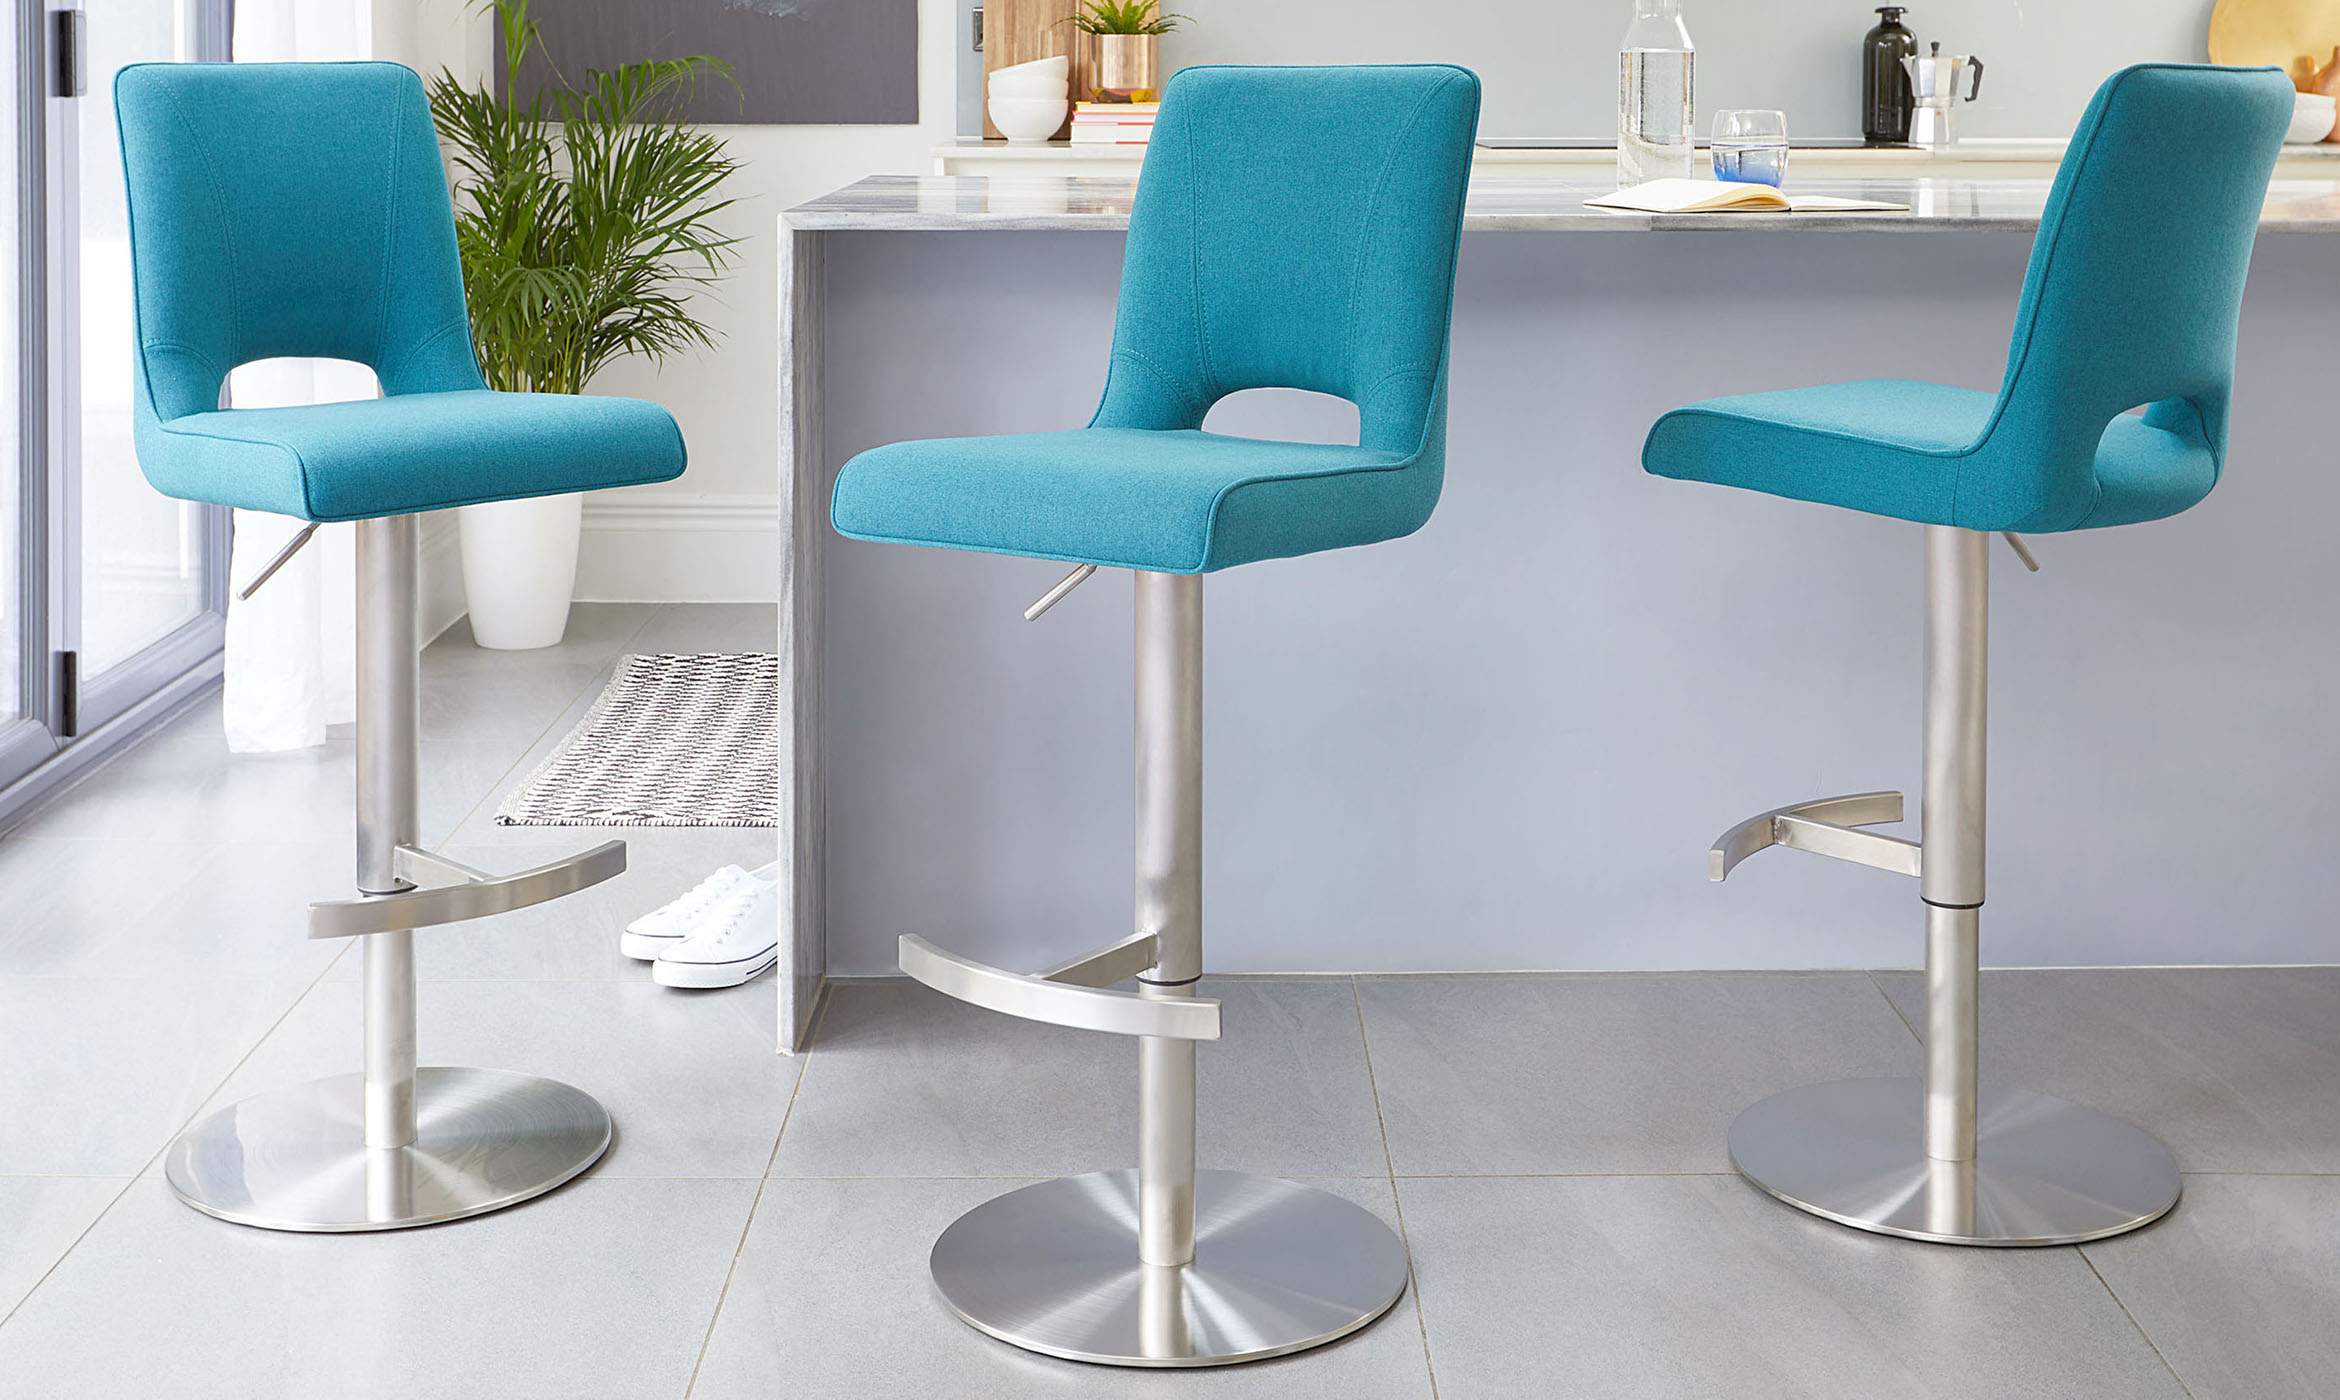 Teal Fabric Bar Stool With Gas Lift, Turquoise Bar Stools Kitchen